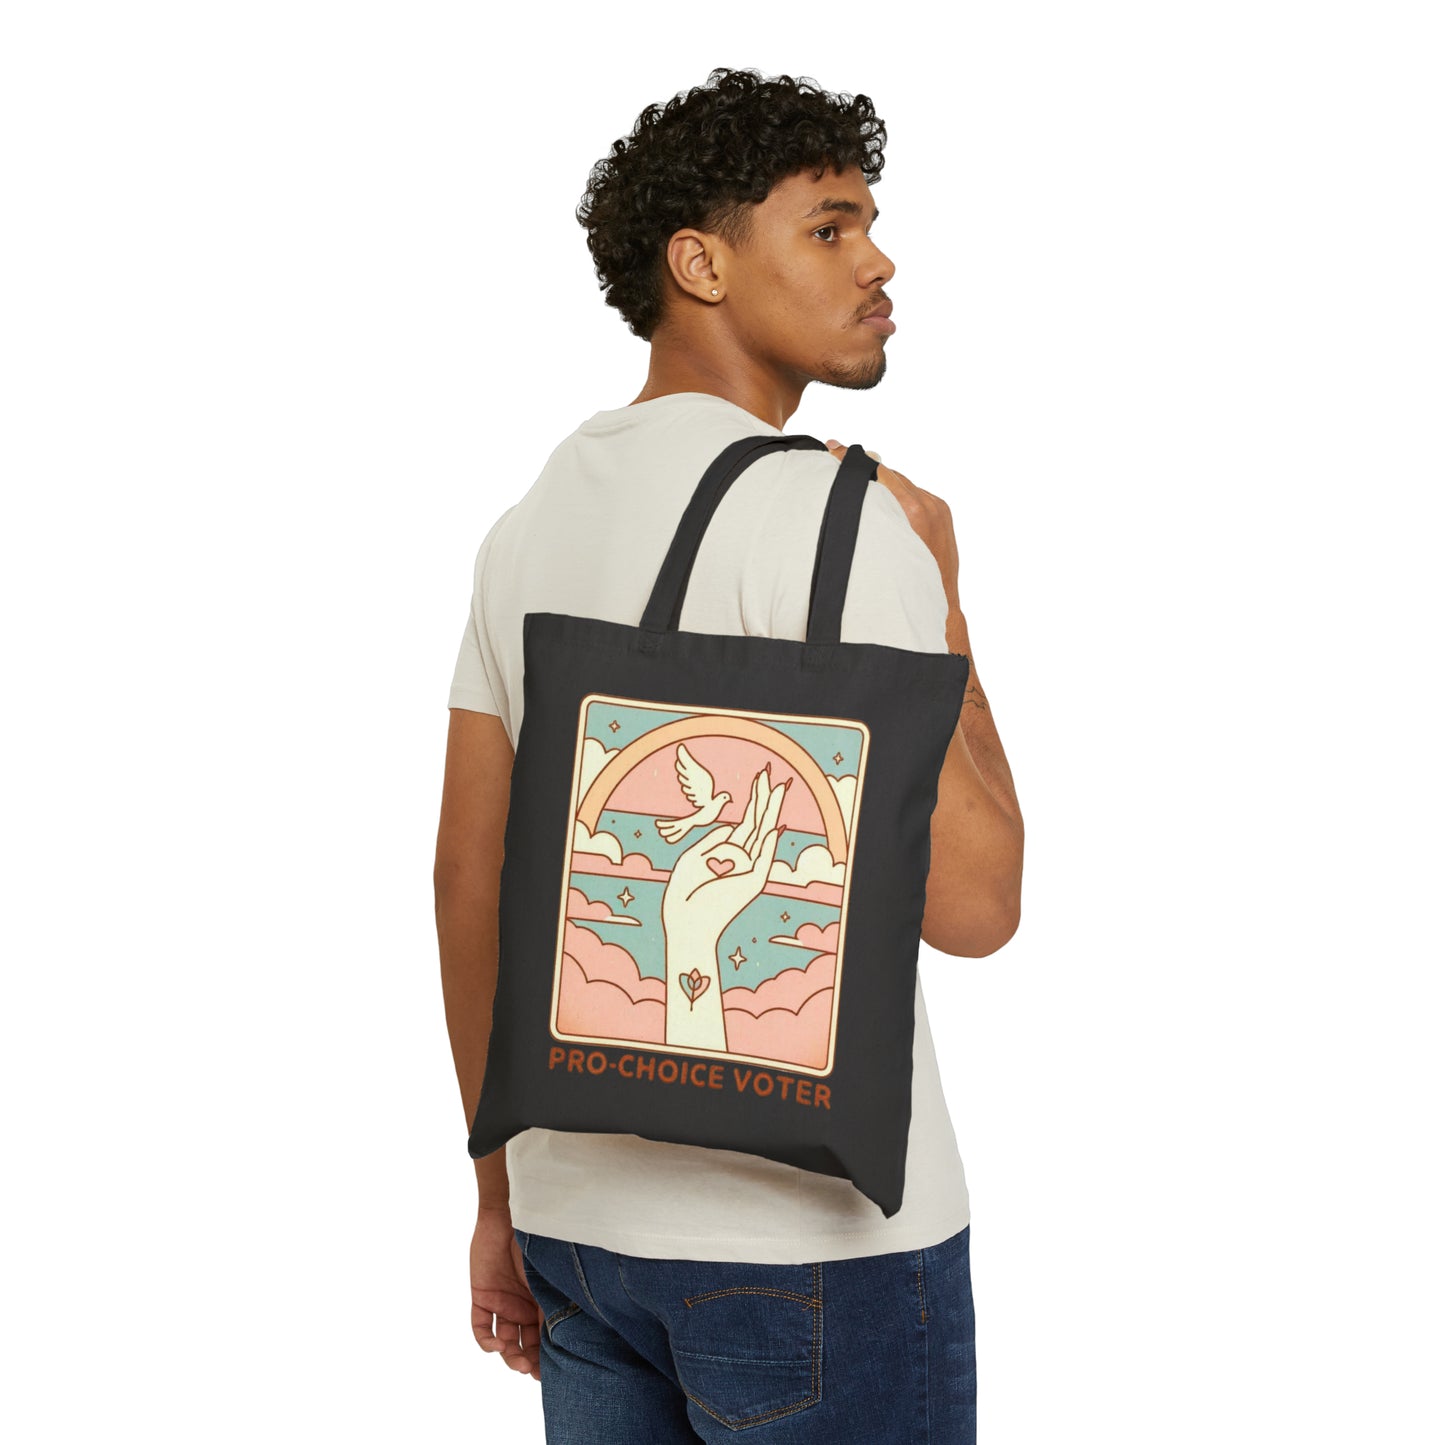 Pro-Choice Voter (Canvas Tote Bag)